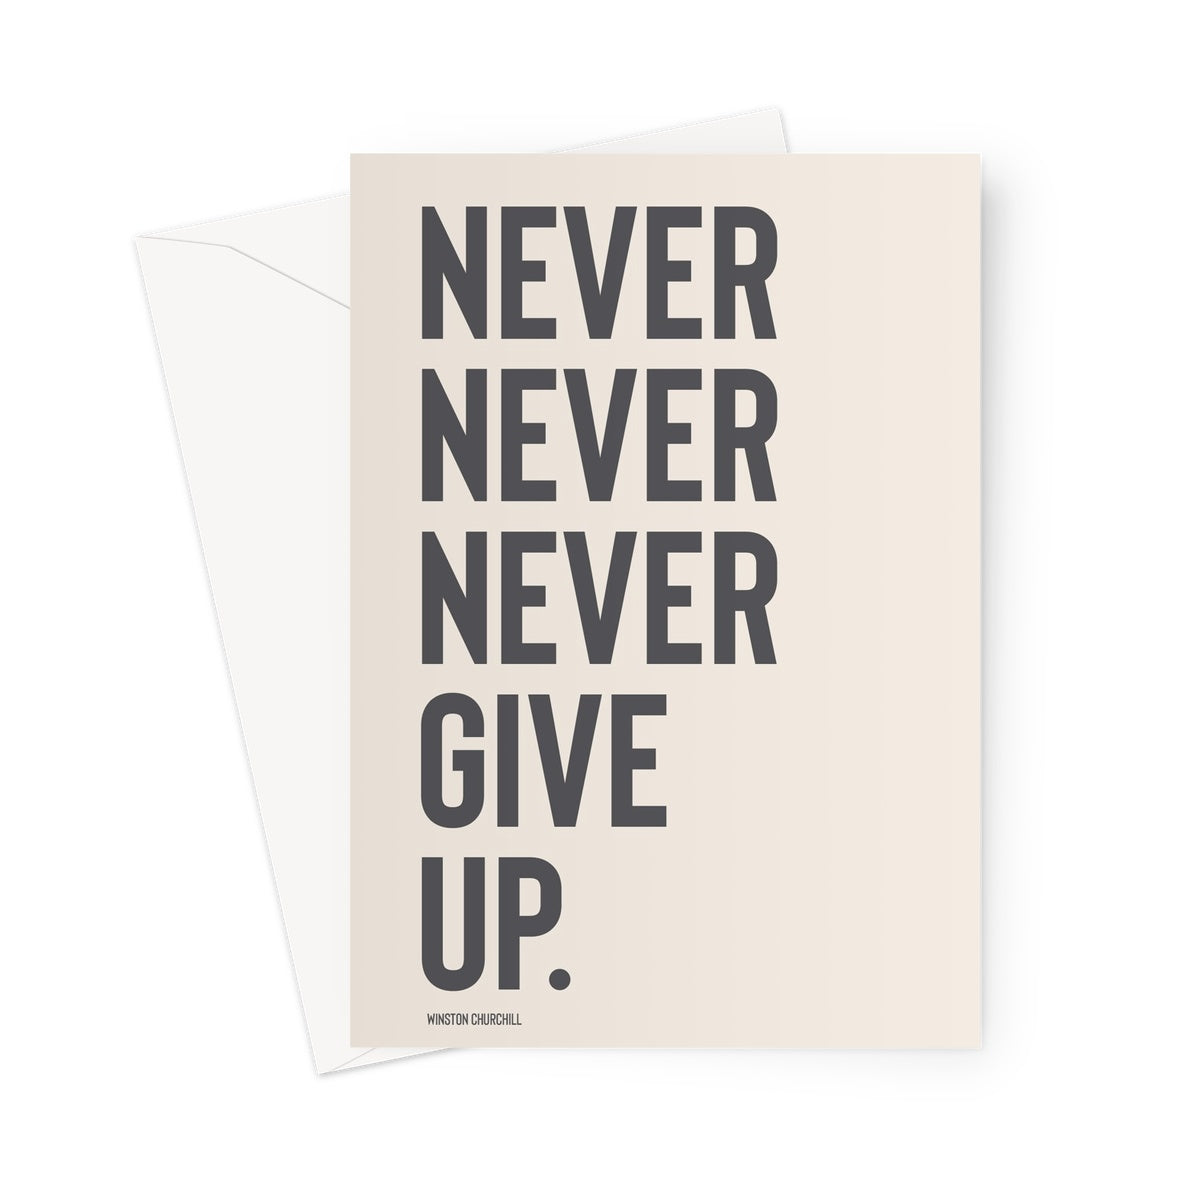 NEVER GIVE UP - Stone / Charcoal Greeting Card